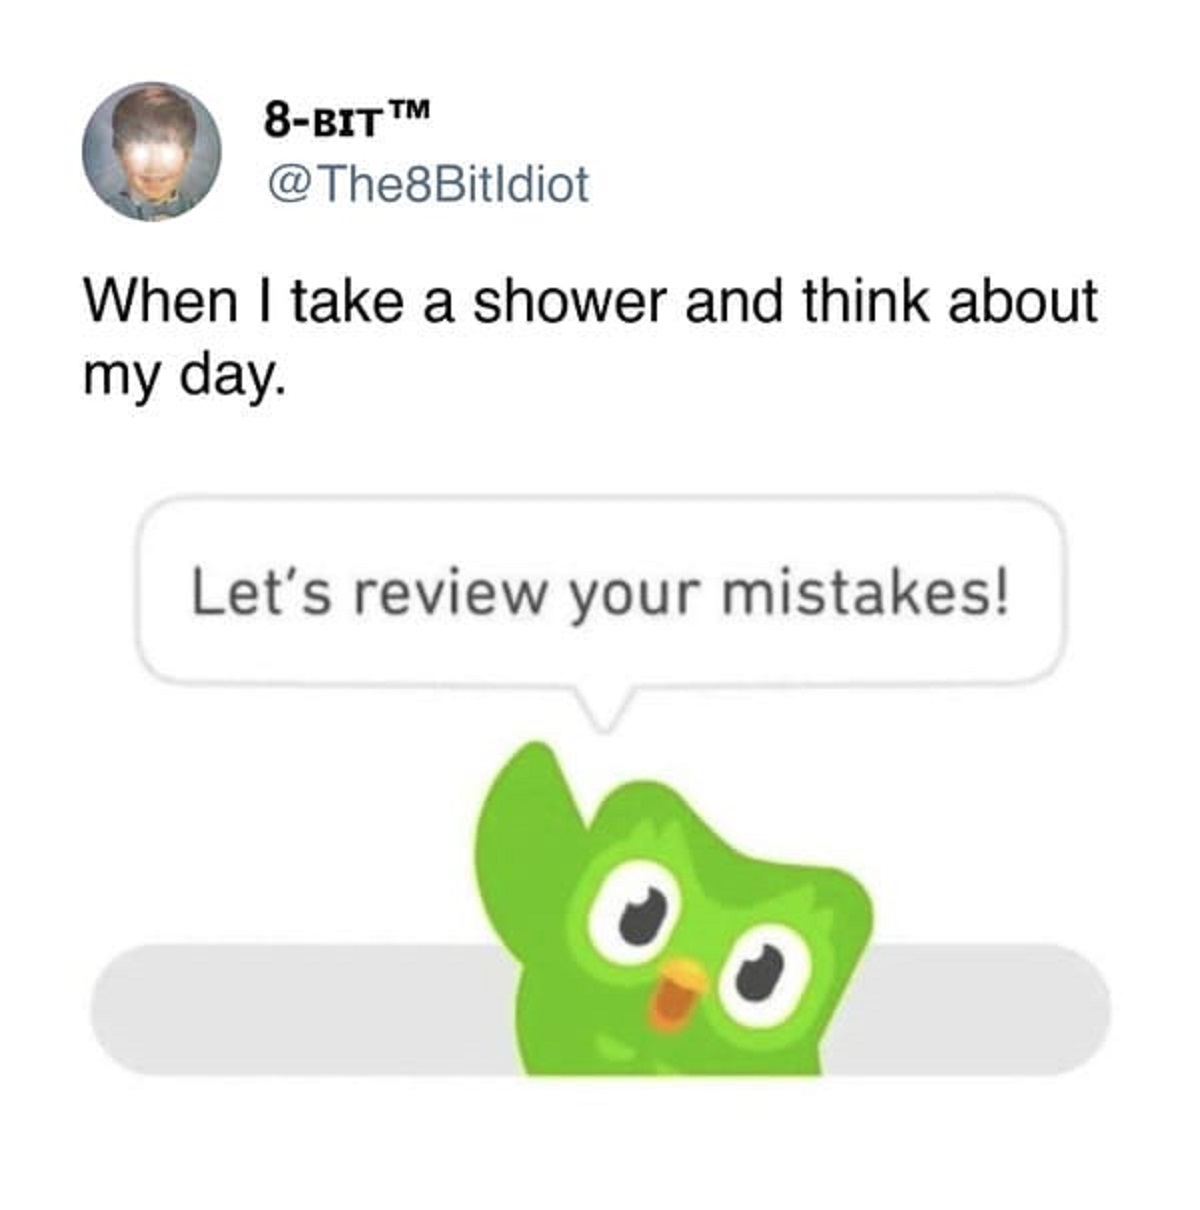 diagram - 8Bitm When I take a shower and think about my day. Let's review your mistakes!